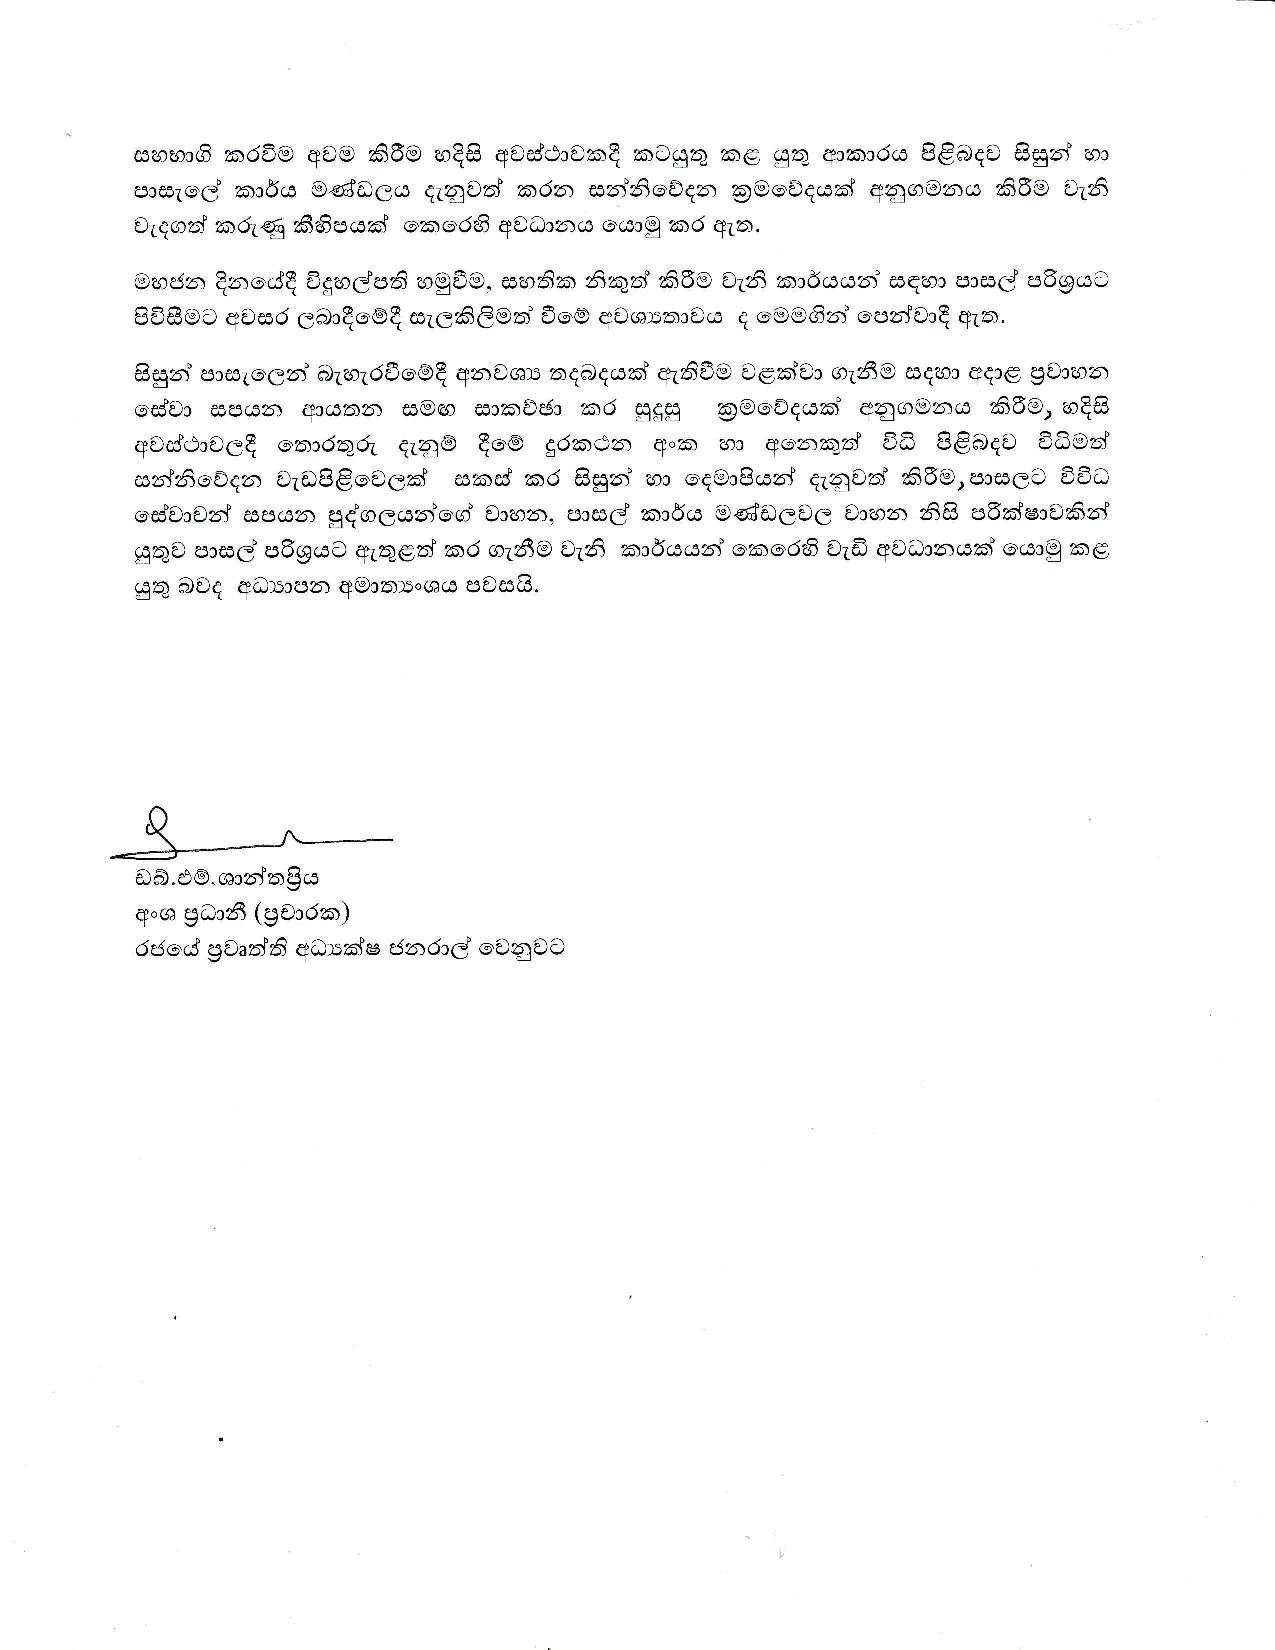 Media Release on 26.04.2019 page 002